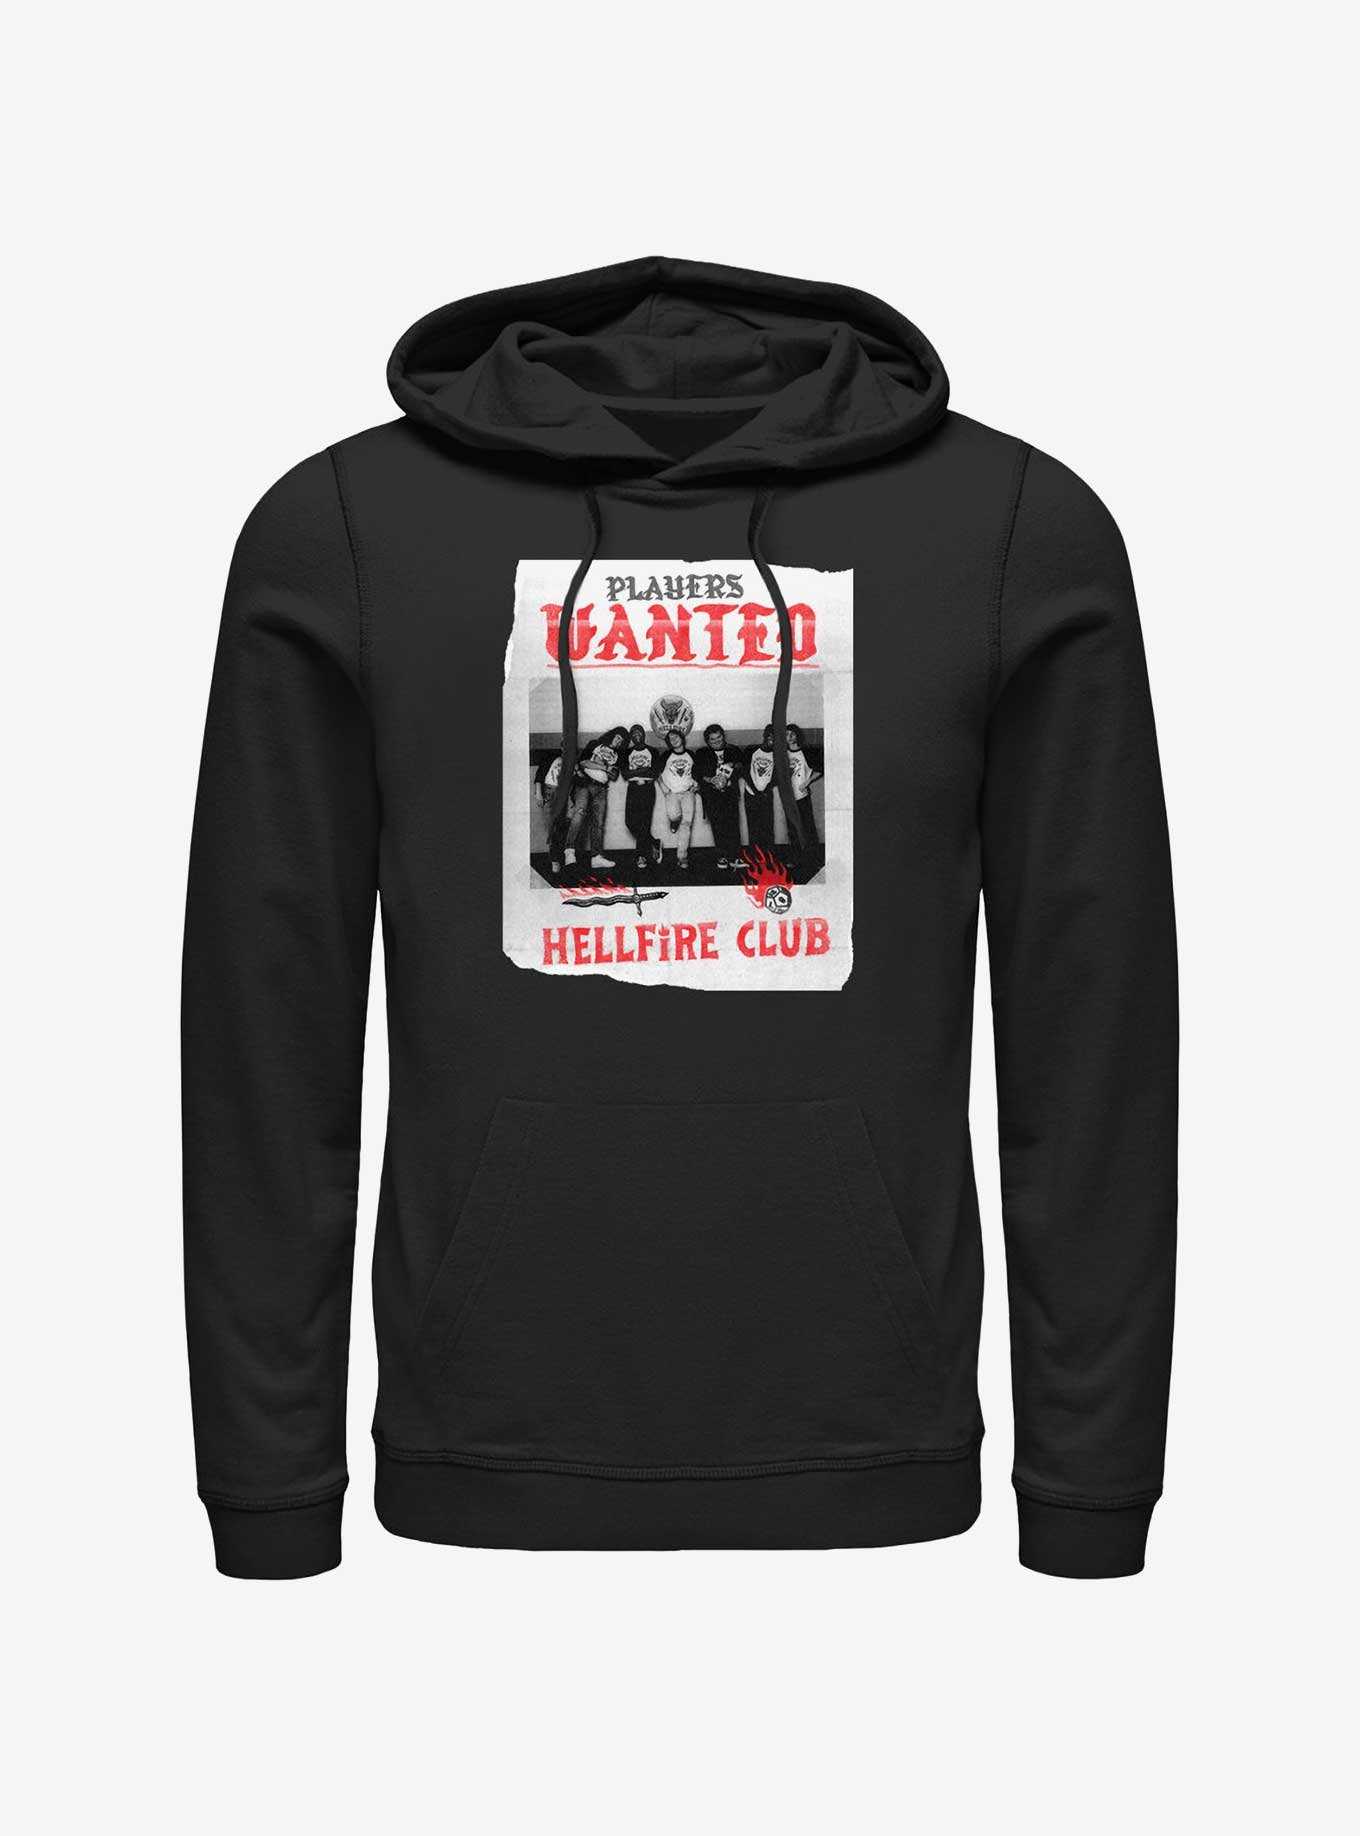 Stranger Things Hellfire Club Players Wanted Poster Hoodie, , hi-res